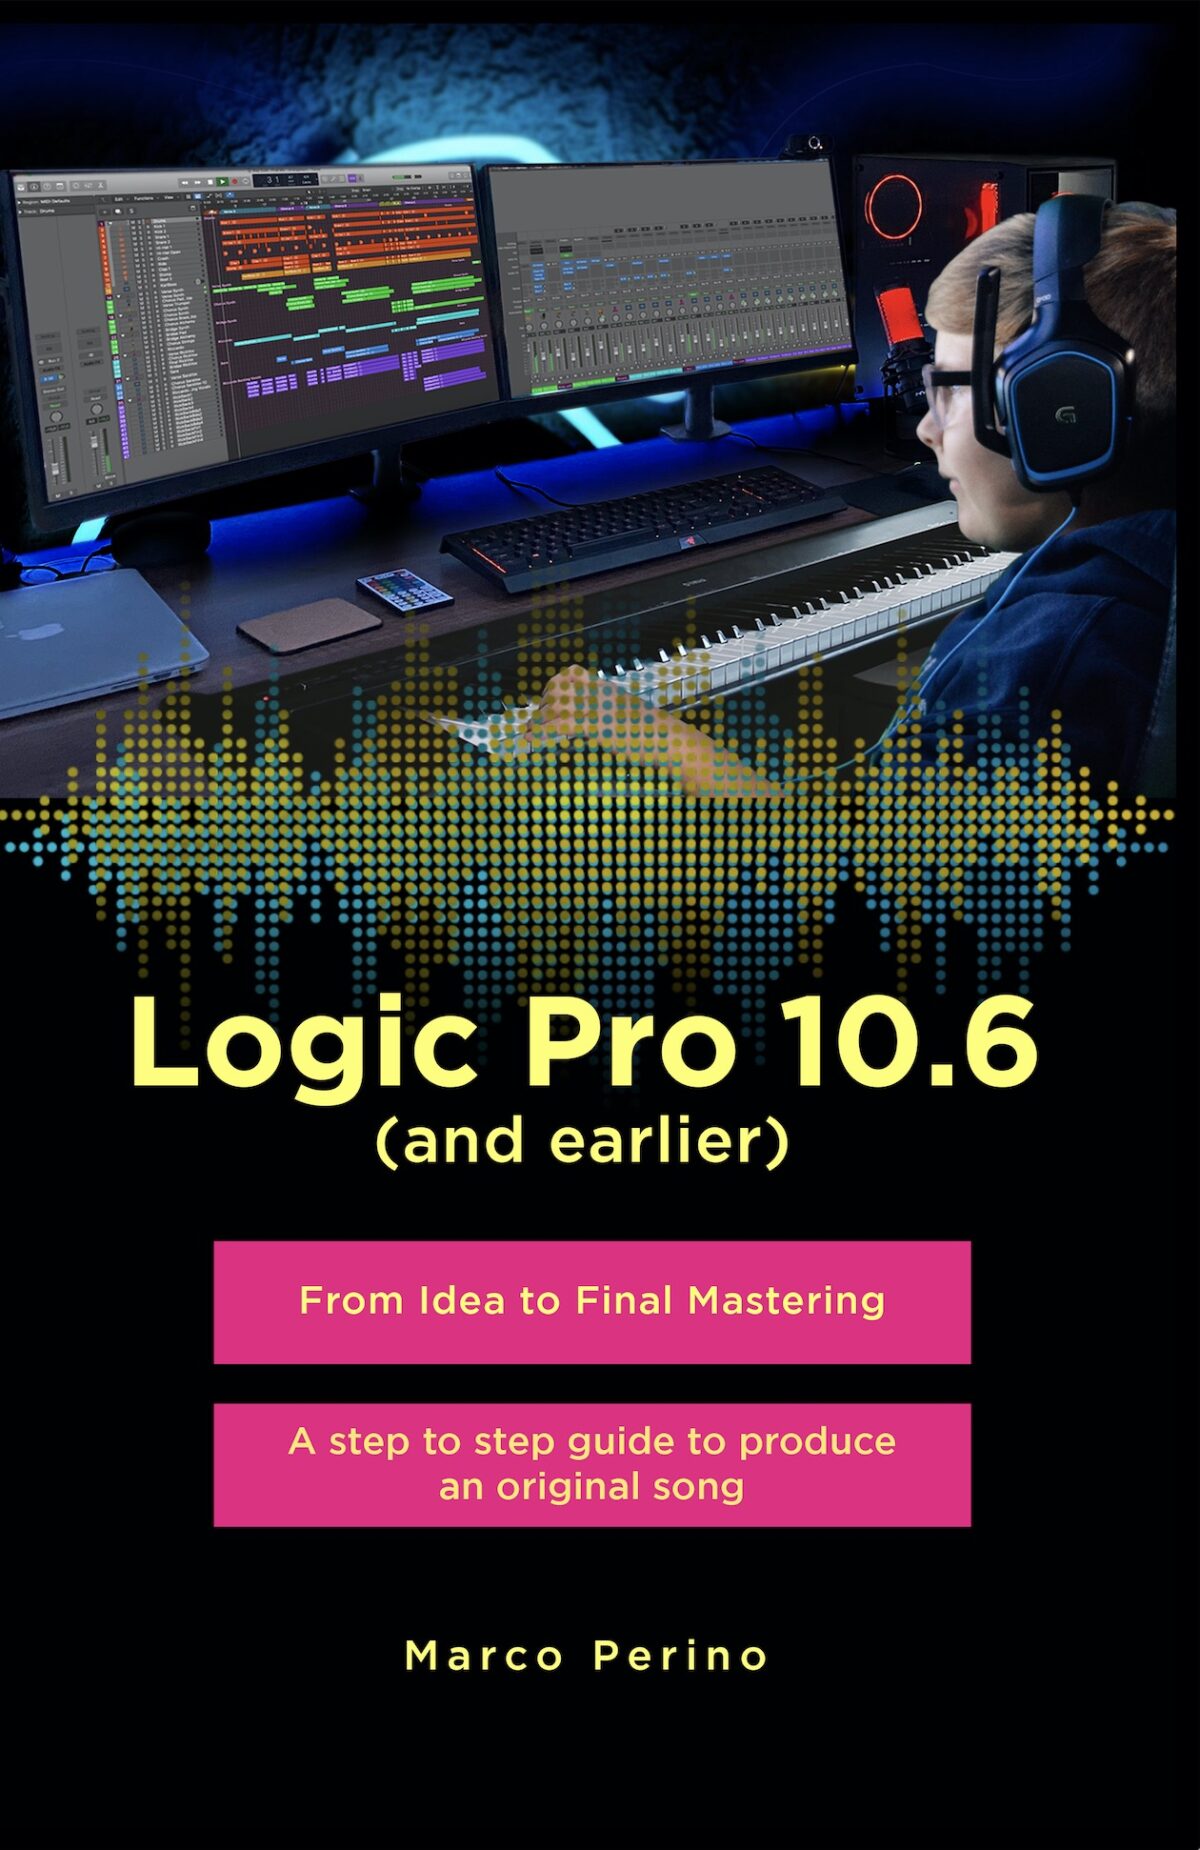 logic pro 10.6 system requirements